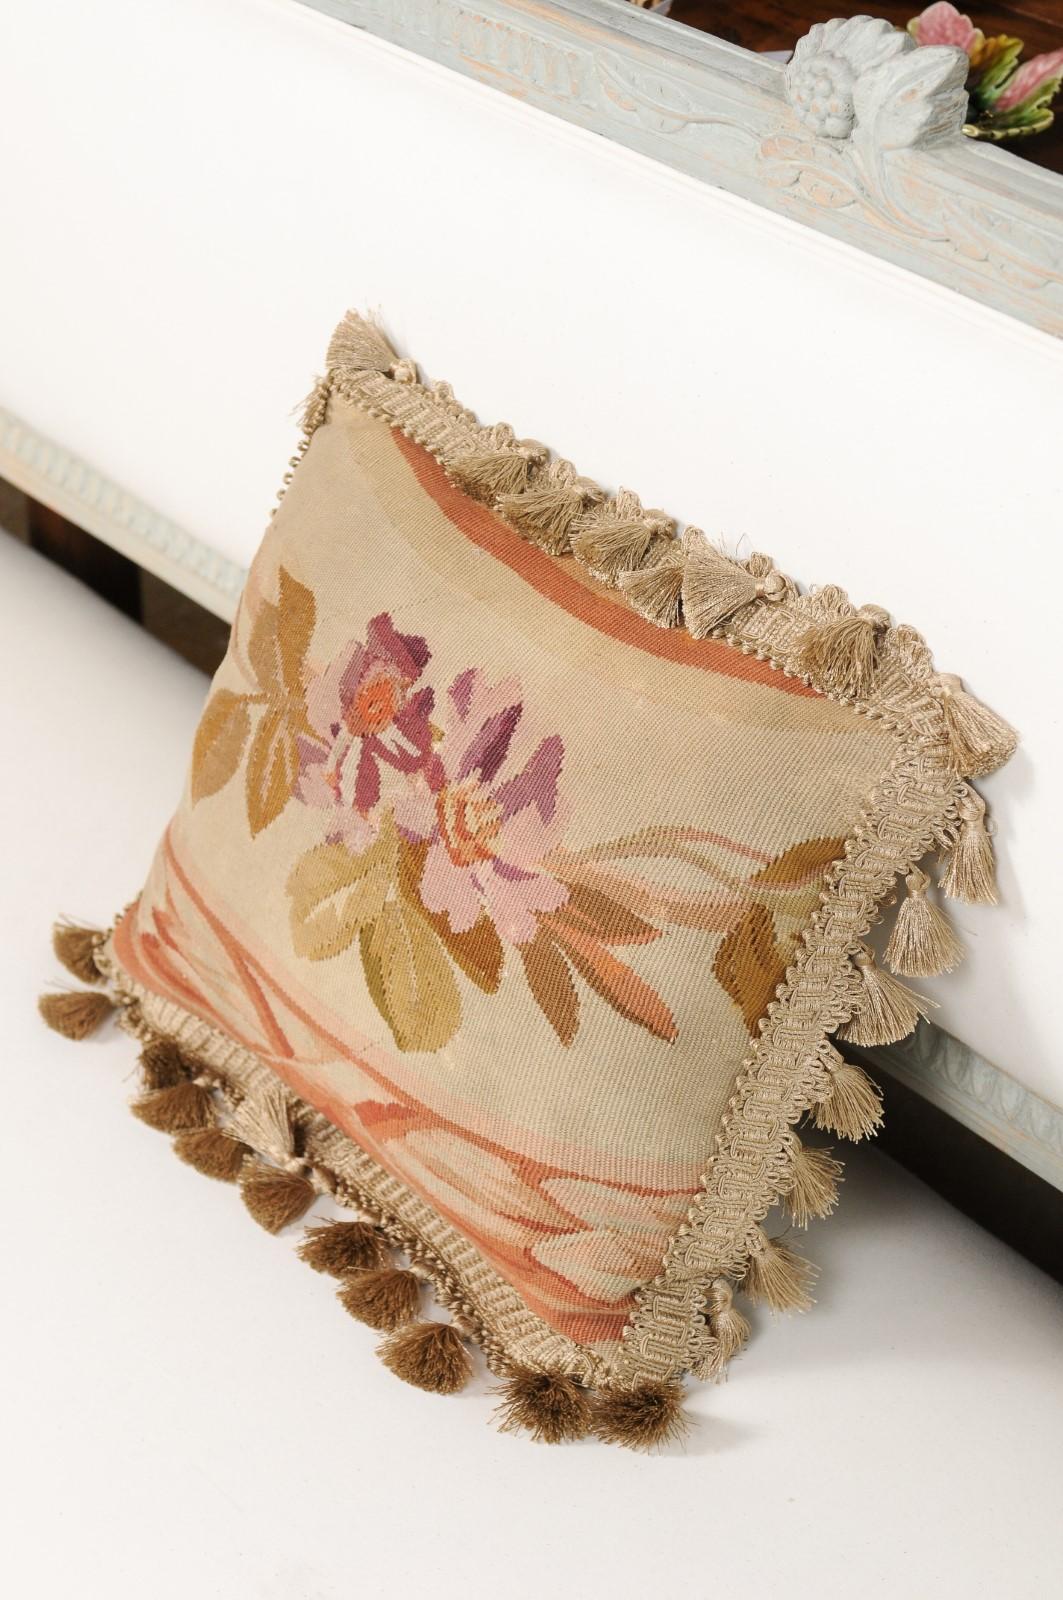 19th Century French Aubusson Tapestry Pillow with Purple Flowers and Tassels For Sale 3